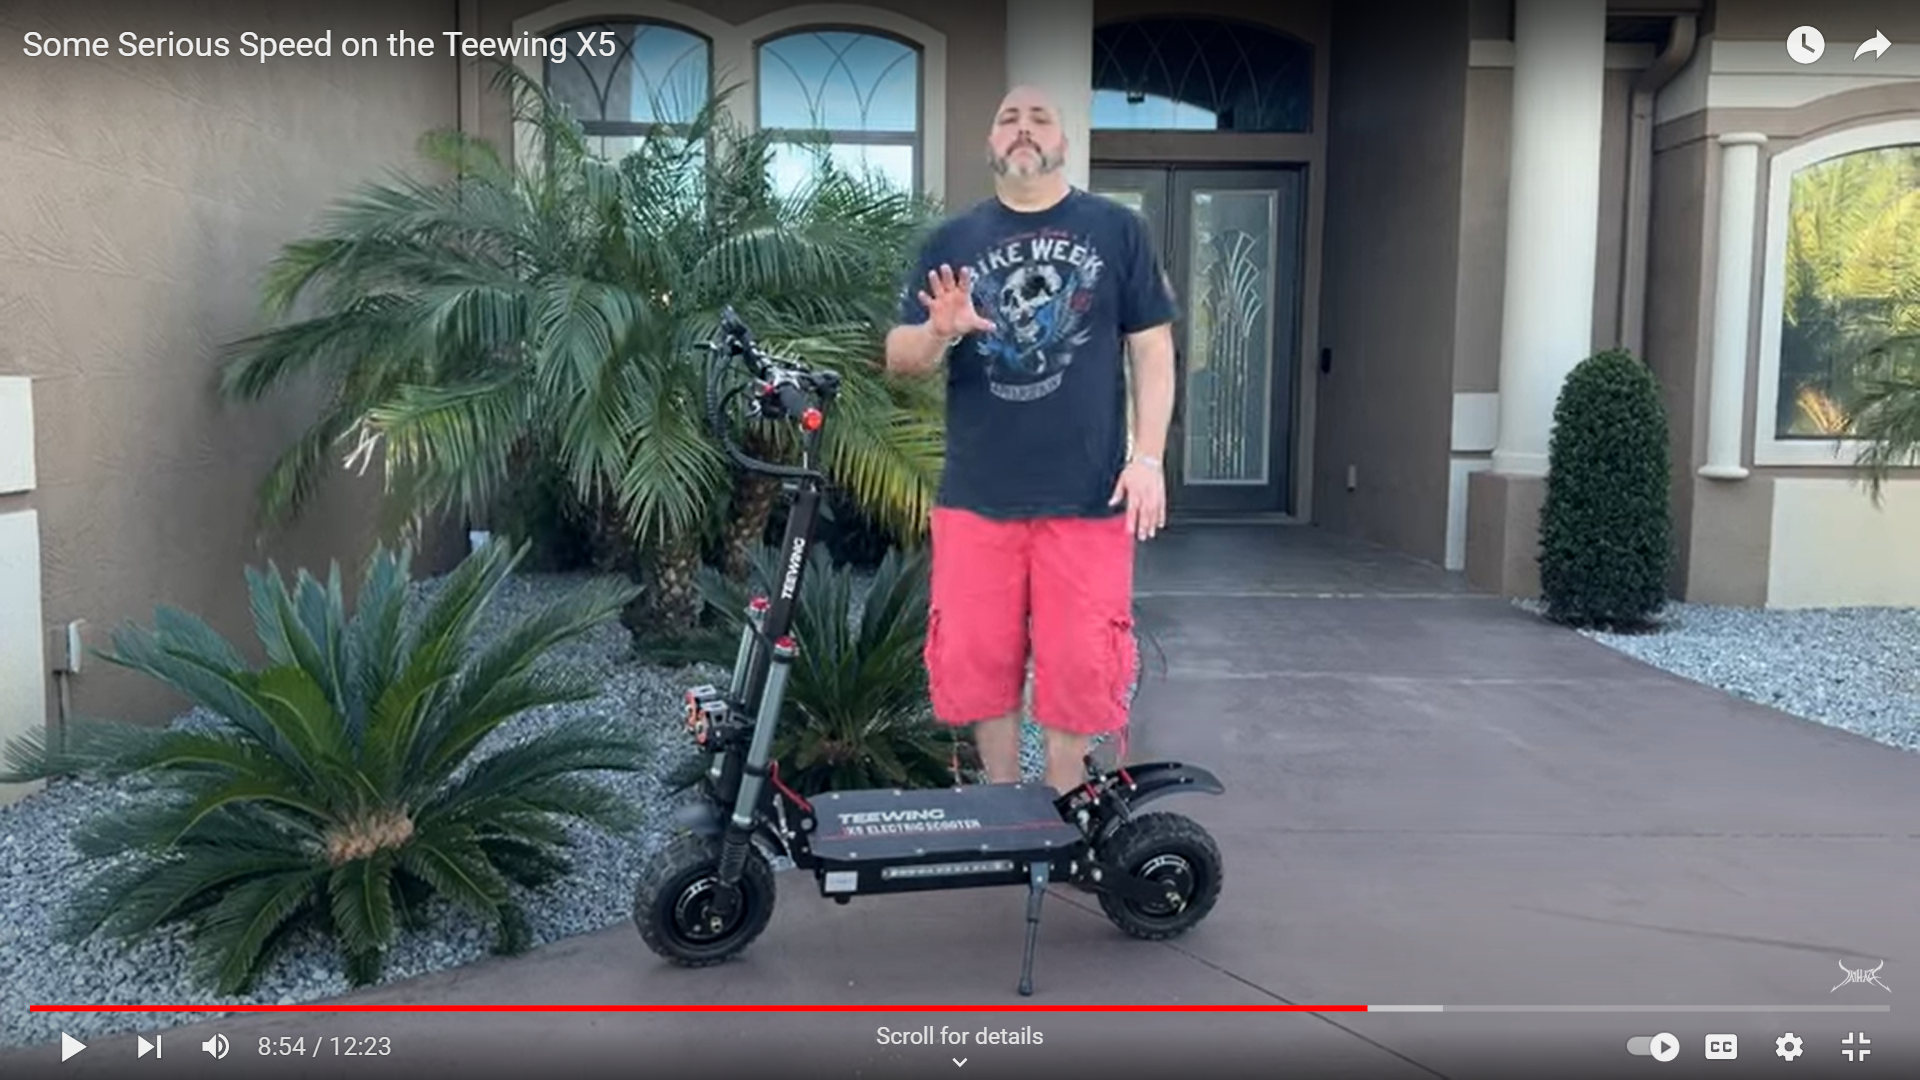 Load video: Video Review of Teewing X5 40mph Electric Scooter